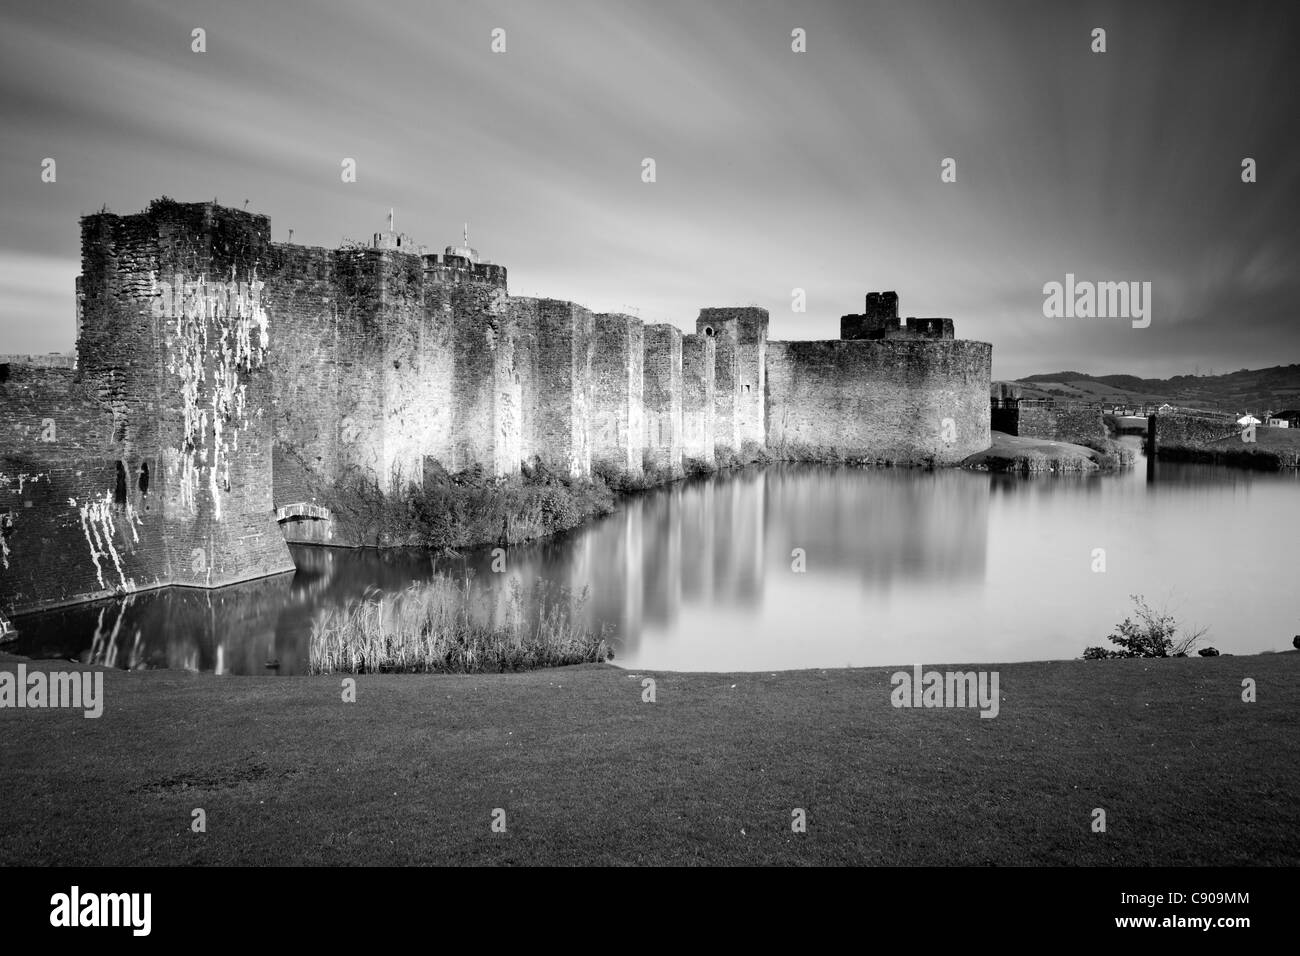 Caerphilly Castle, Caerphilly, South Wales, UK, Europe Stock Photo